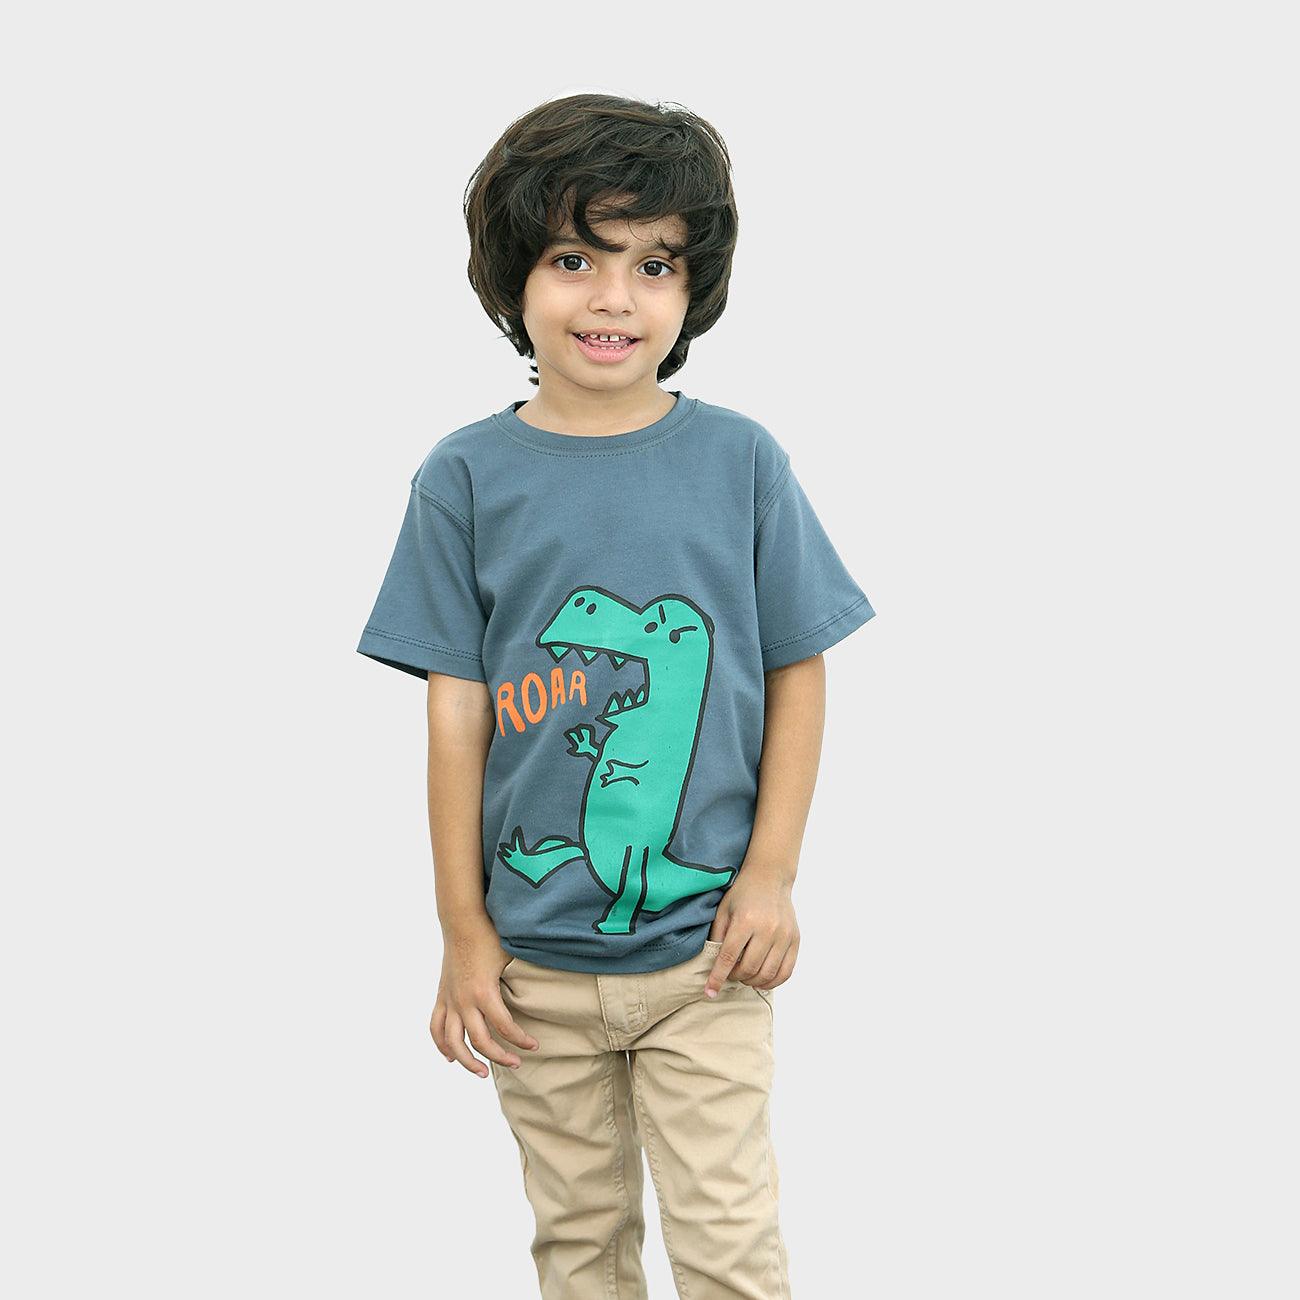 Boys Animated Printed Soft Cotton T-Shirt 9 MONTH - 10 YRS (MI-11536) - Brands River